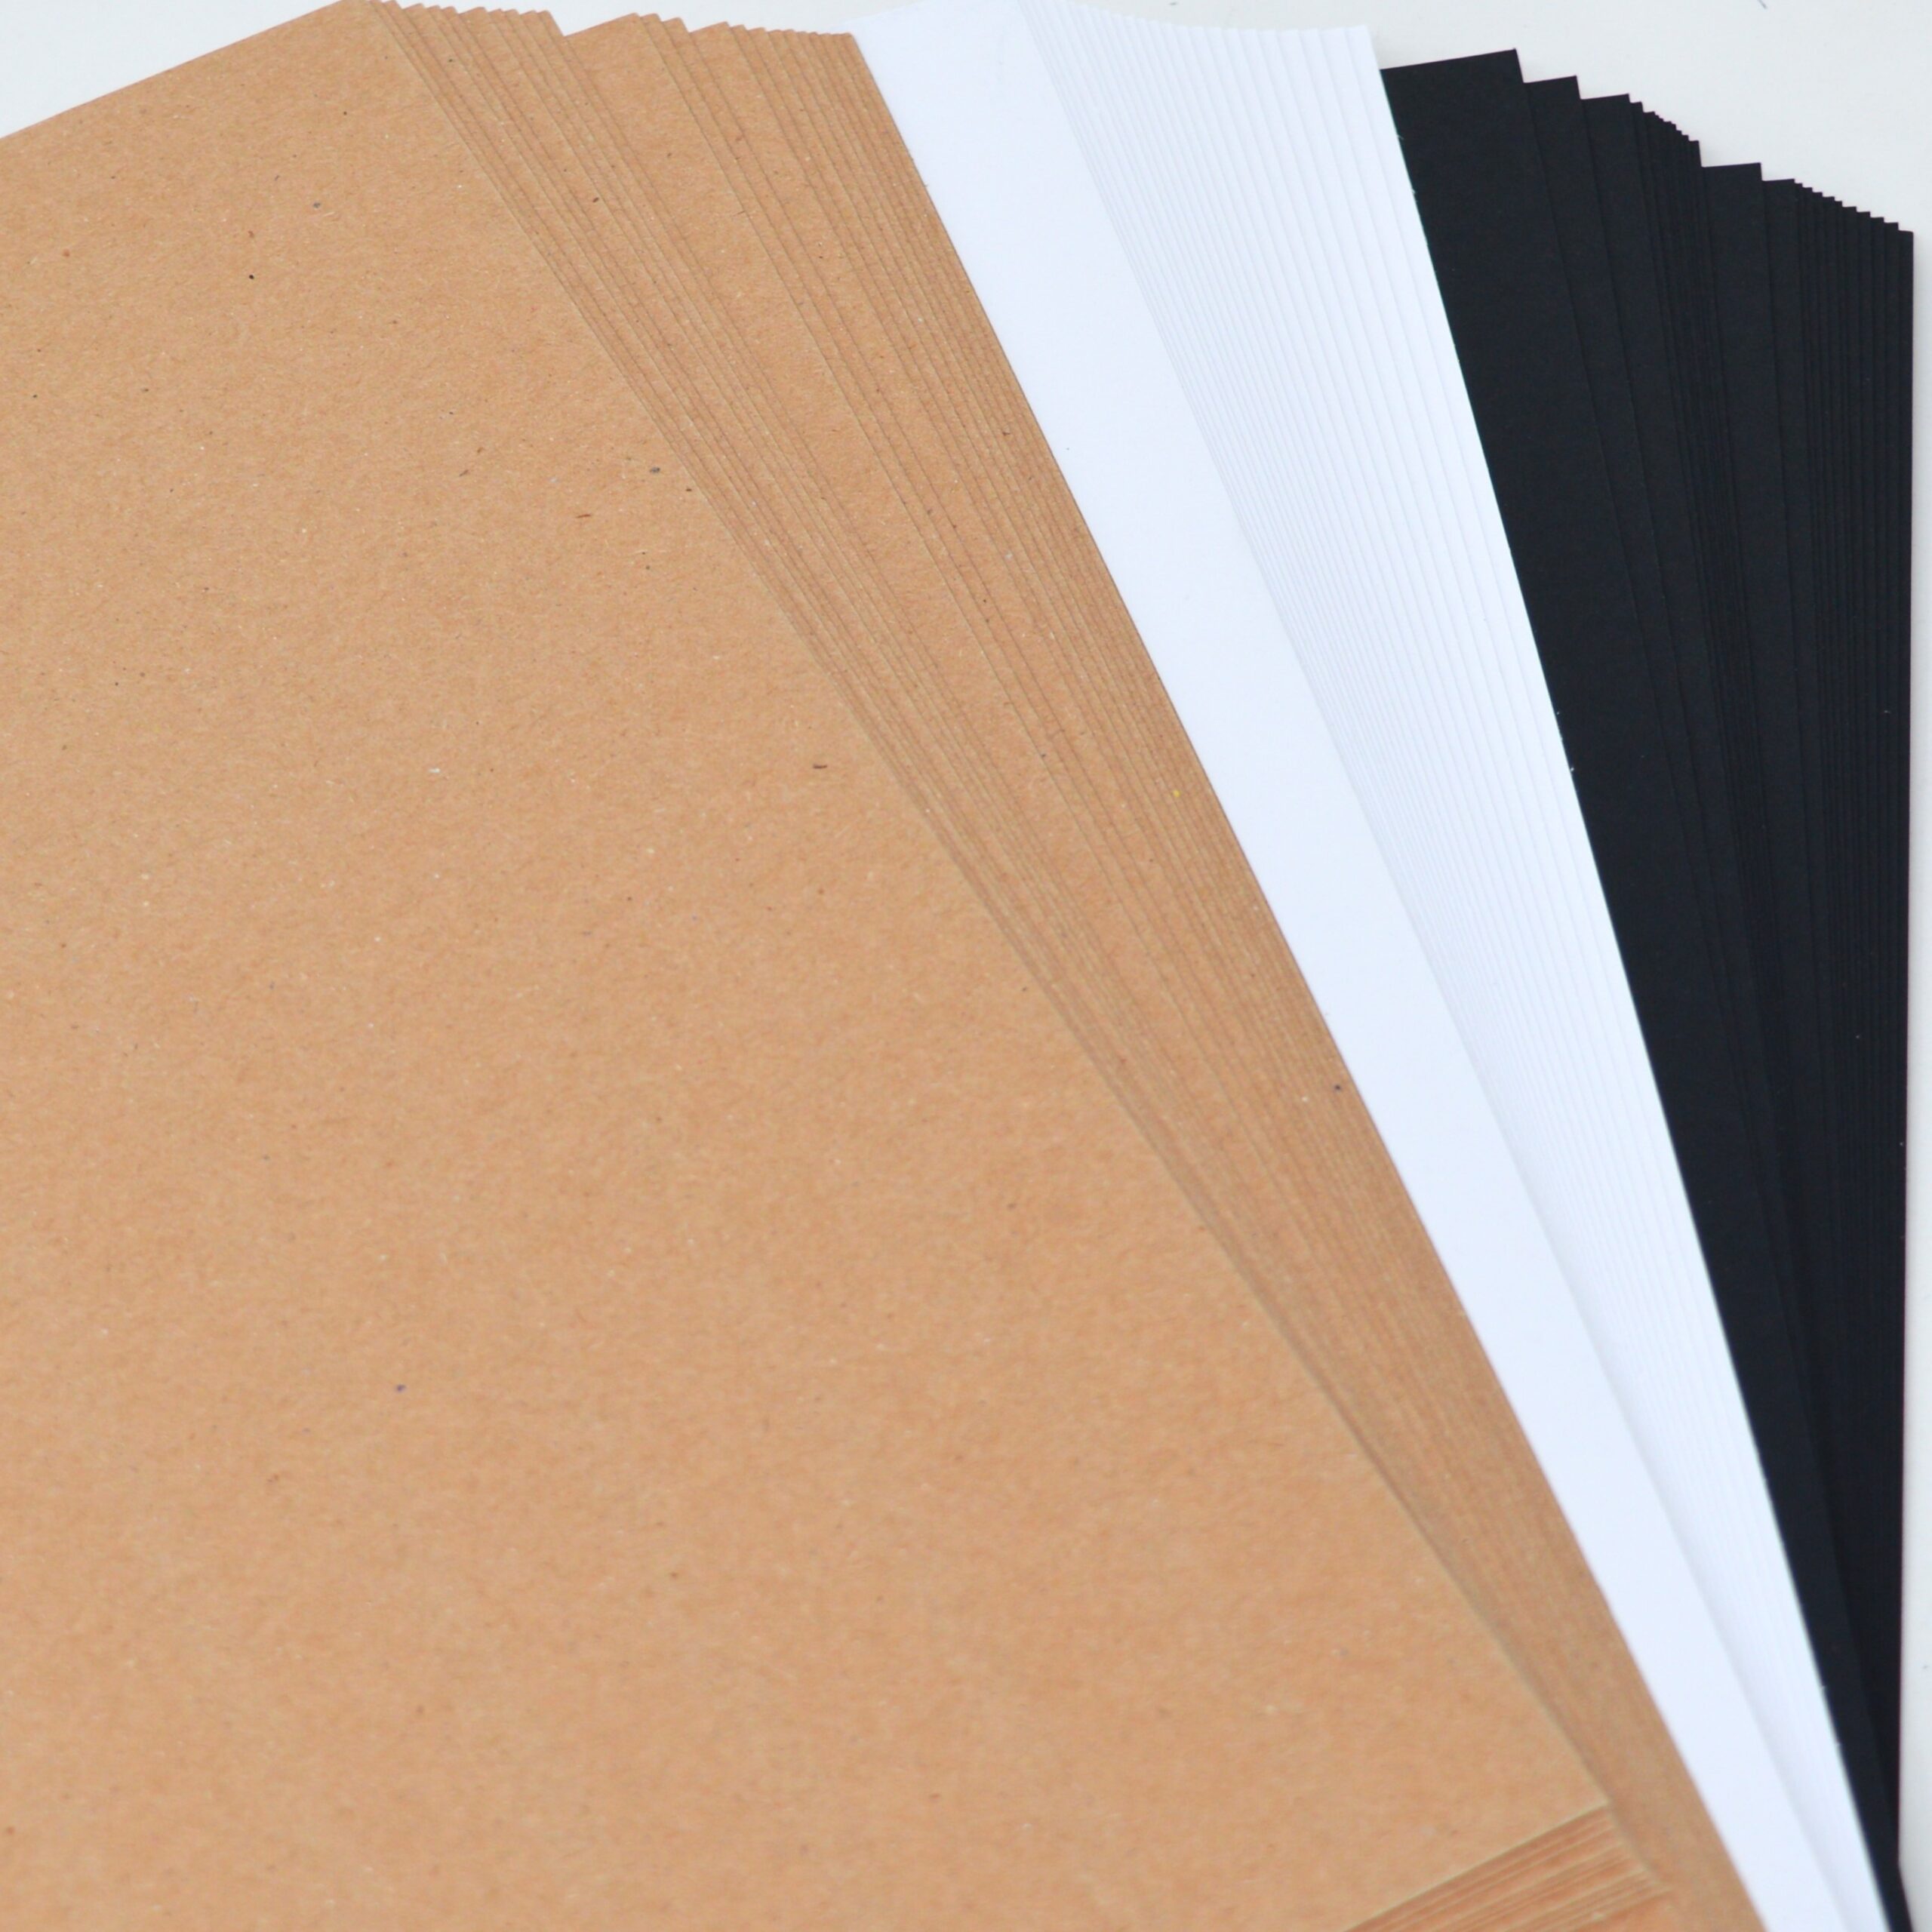 World of Paper A4 White, Black & Kraft Card Collection - 75 Sheets